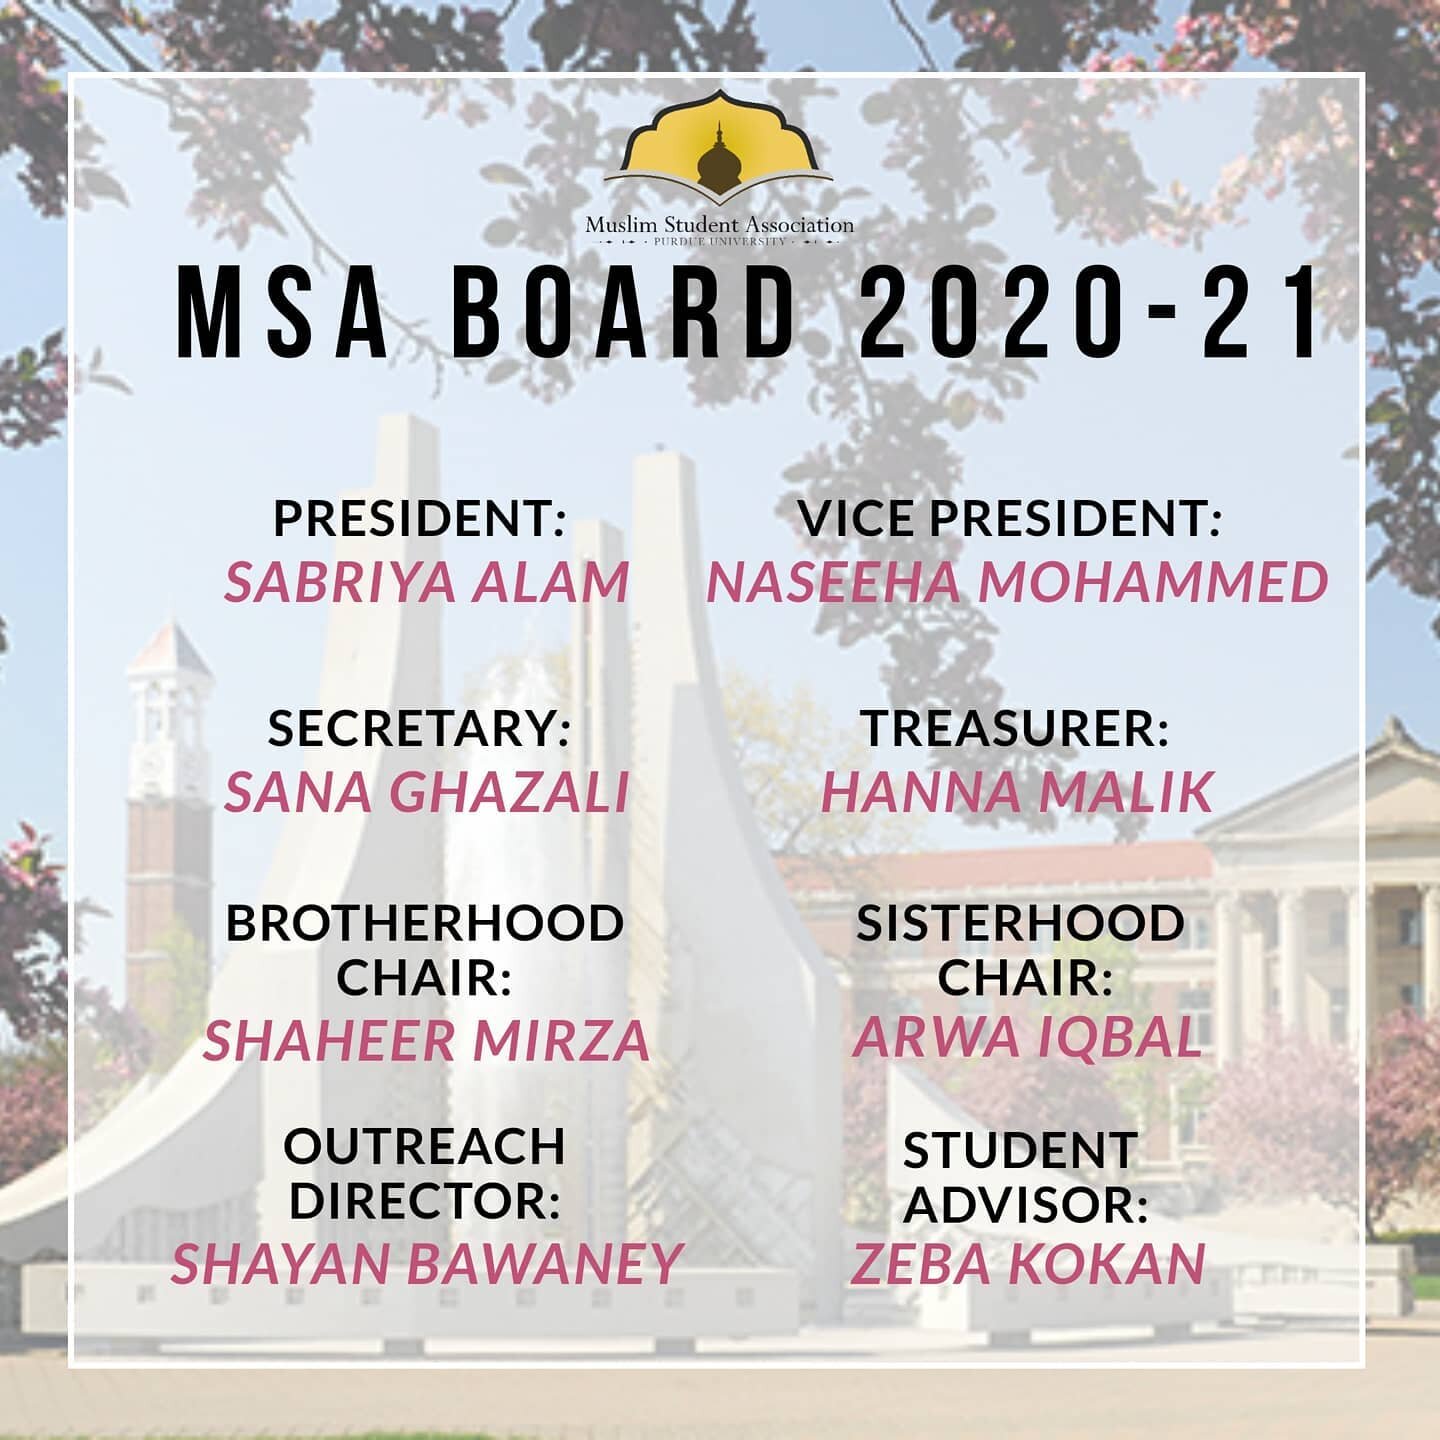 Presenting your MSA Board for 2020-21! We are so excited for this upcoming semester, and have high hopes for a great year - undeterred by COVID-related challenges! We plan to make the most of our time at Purdue (and online) with our fellow brothers a